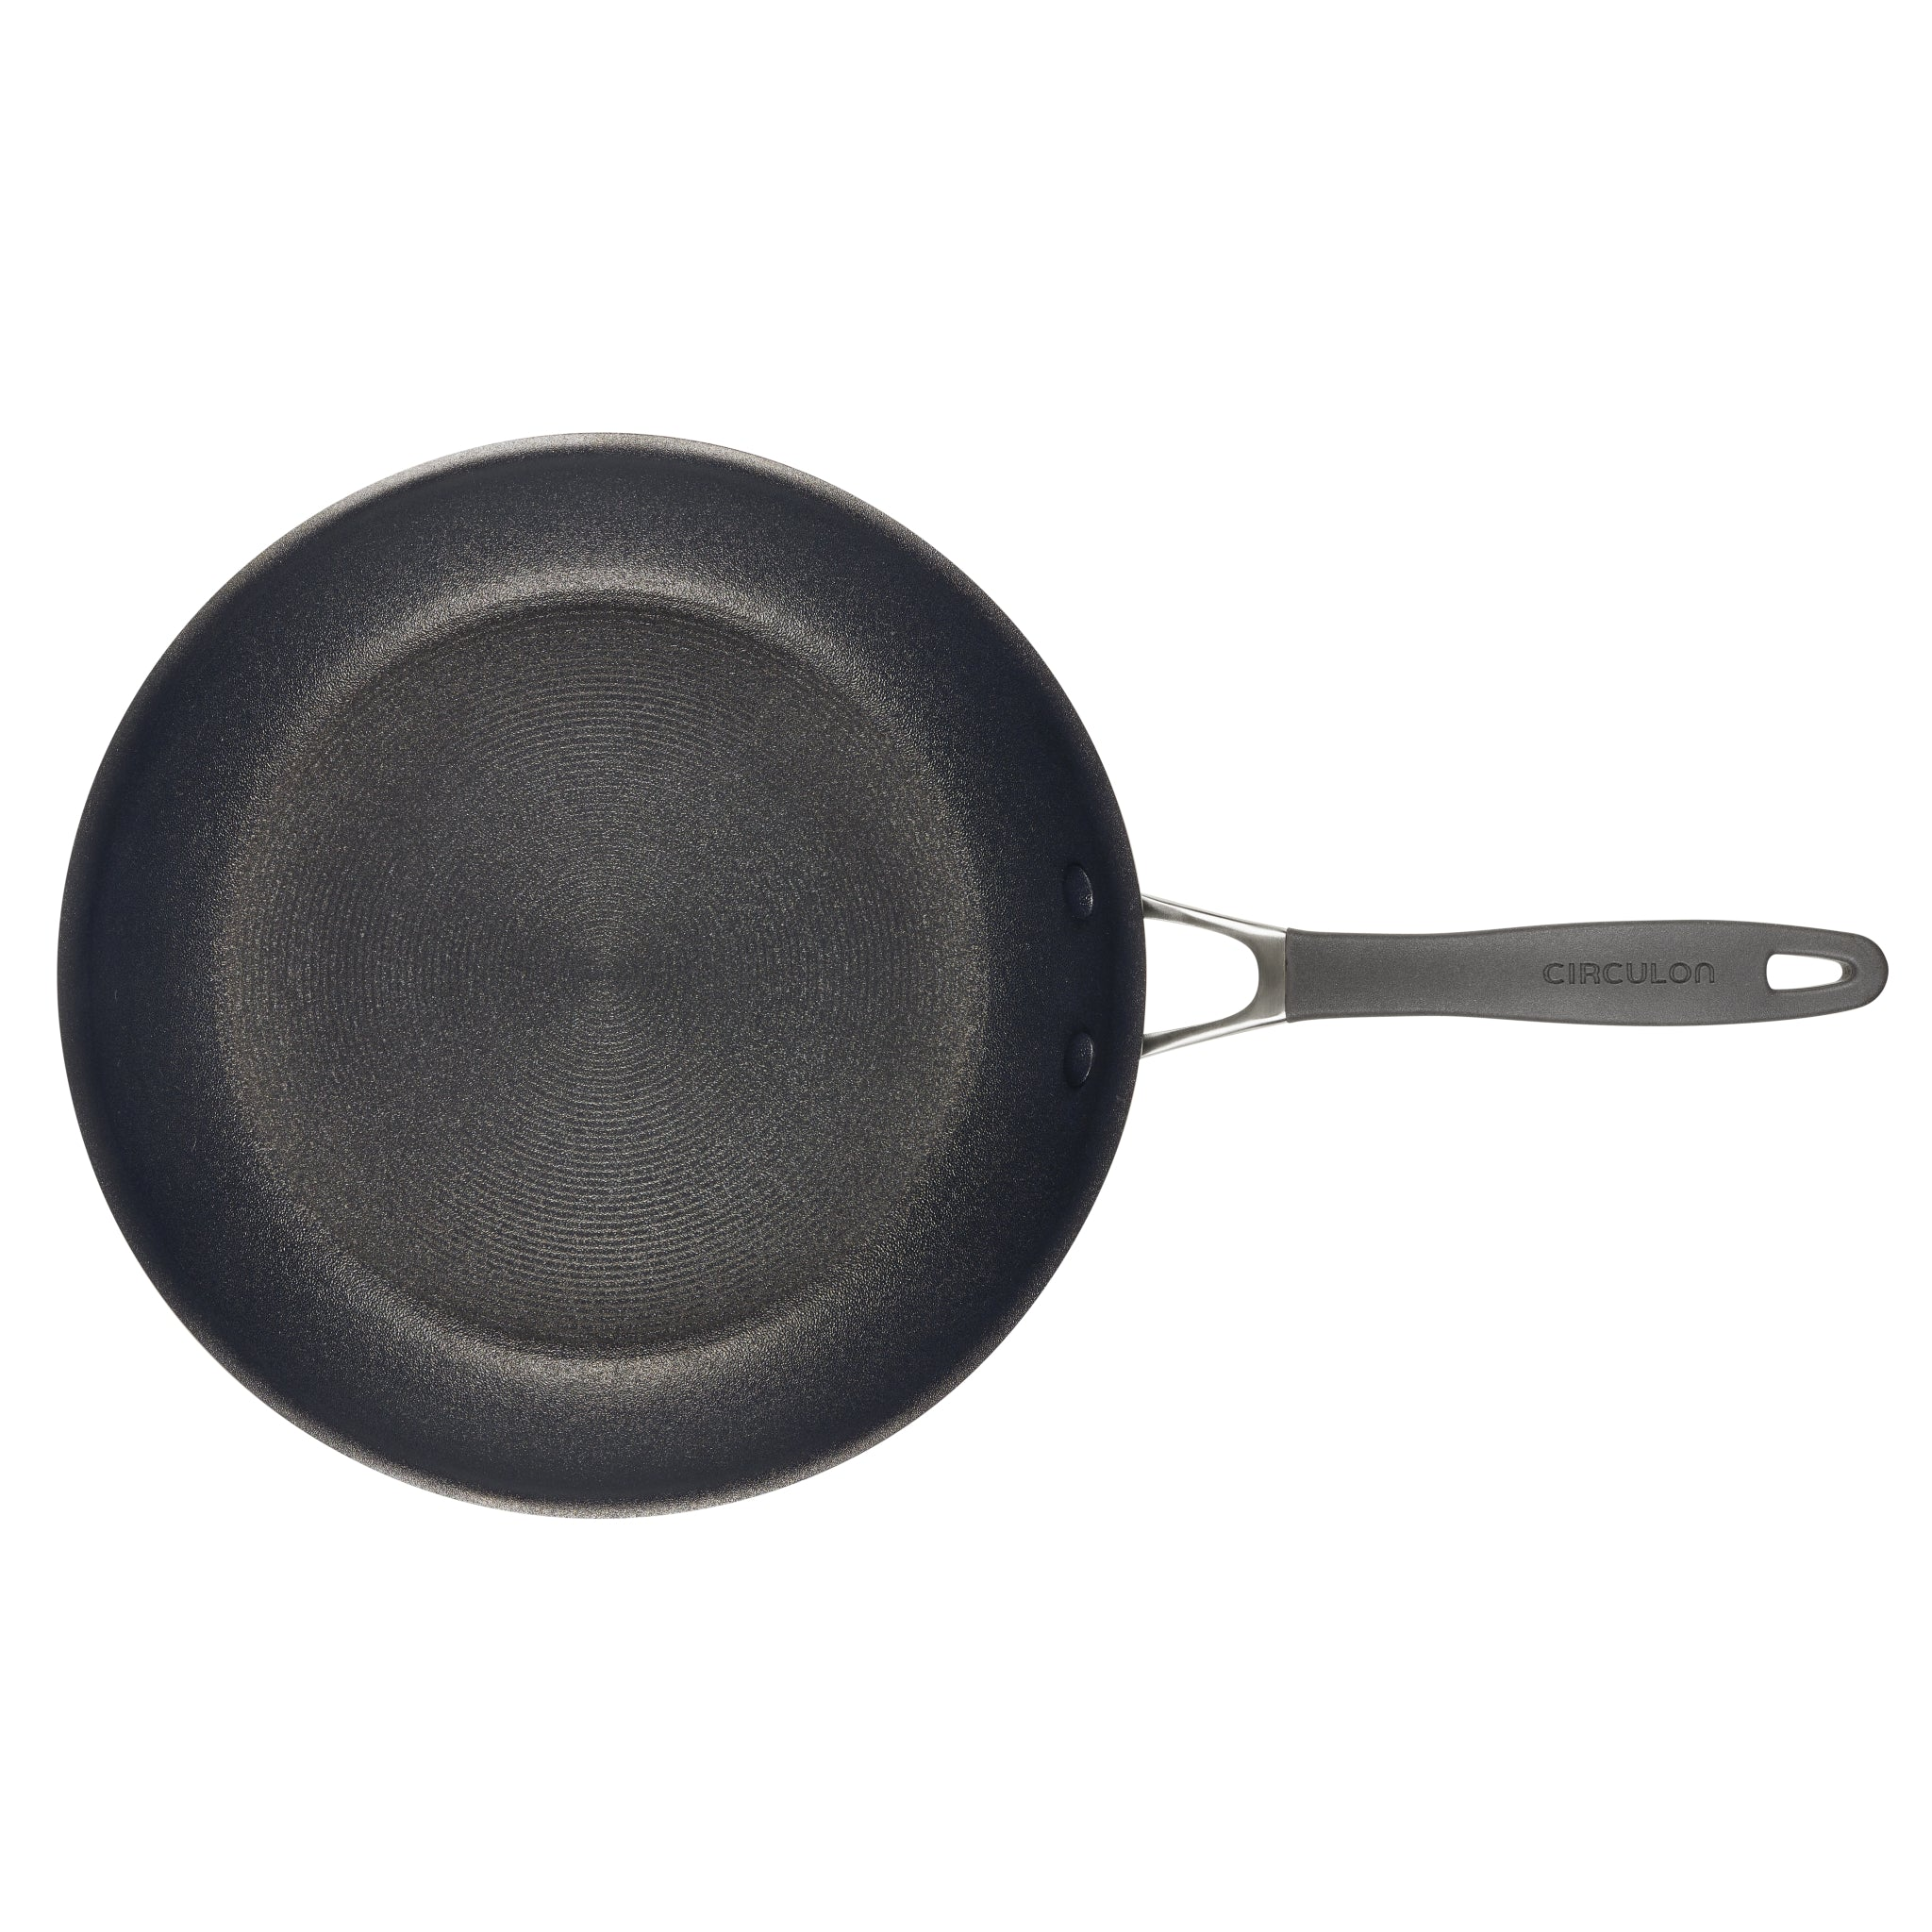 Inner Cooking Surface of the Circulon ScratchDefense Extreme Non-Stick Frying Pan